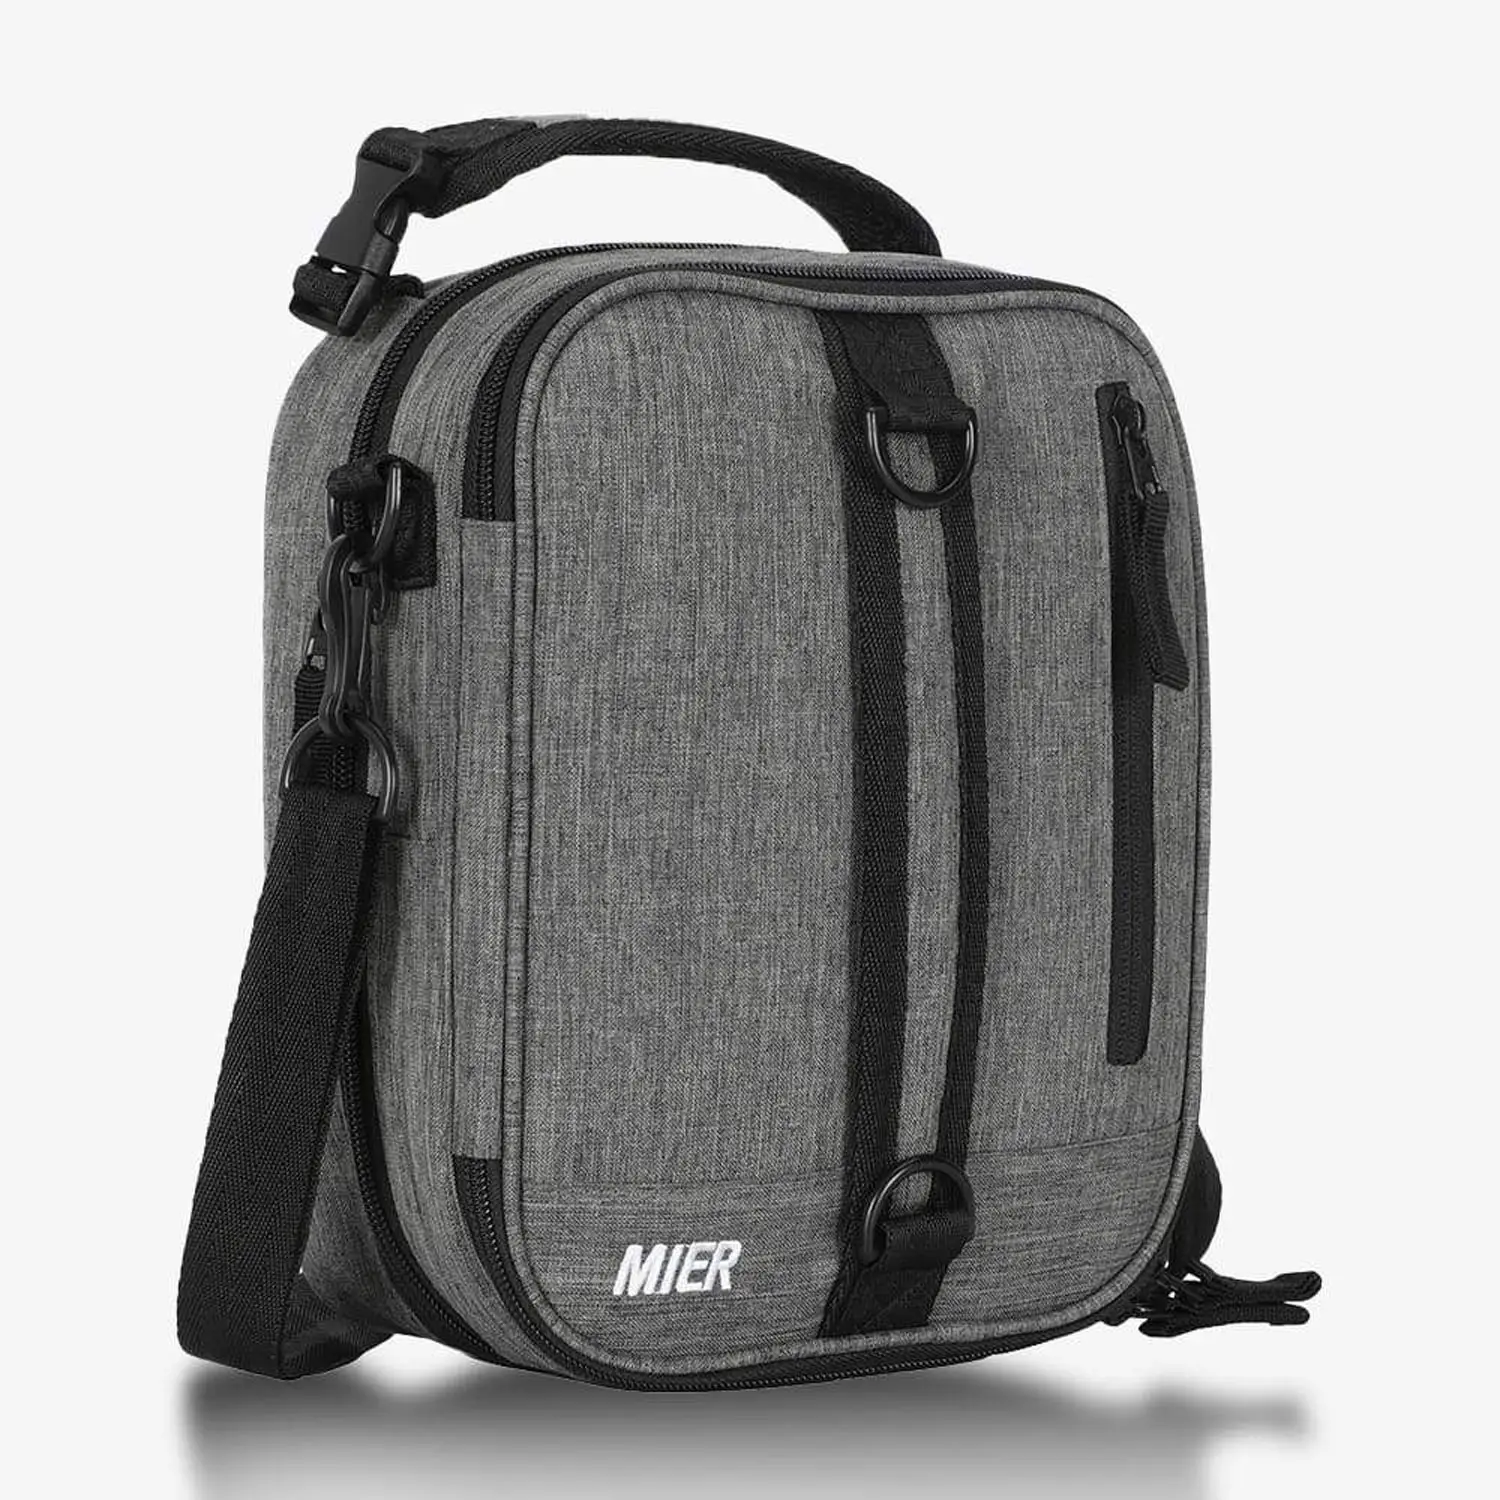 Expandable Lunch Bag Insulated Lunch Box for Men Boys Teens